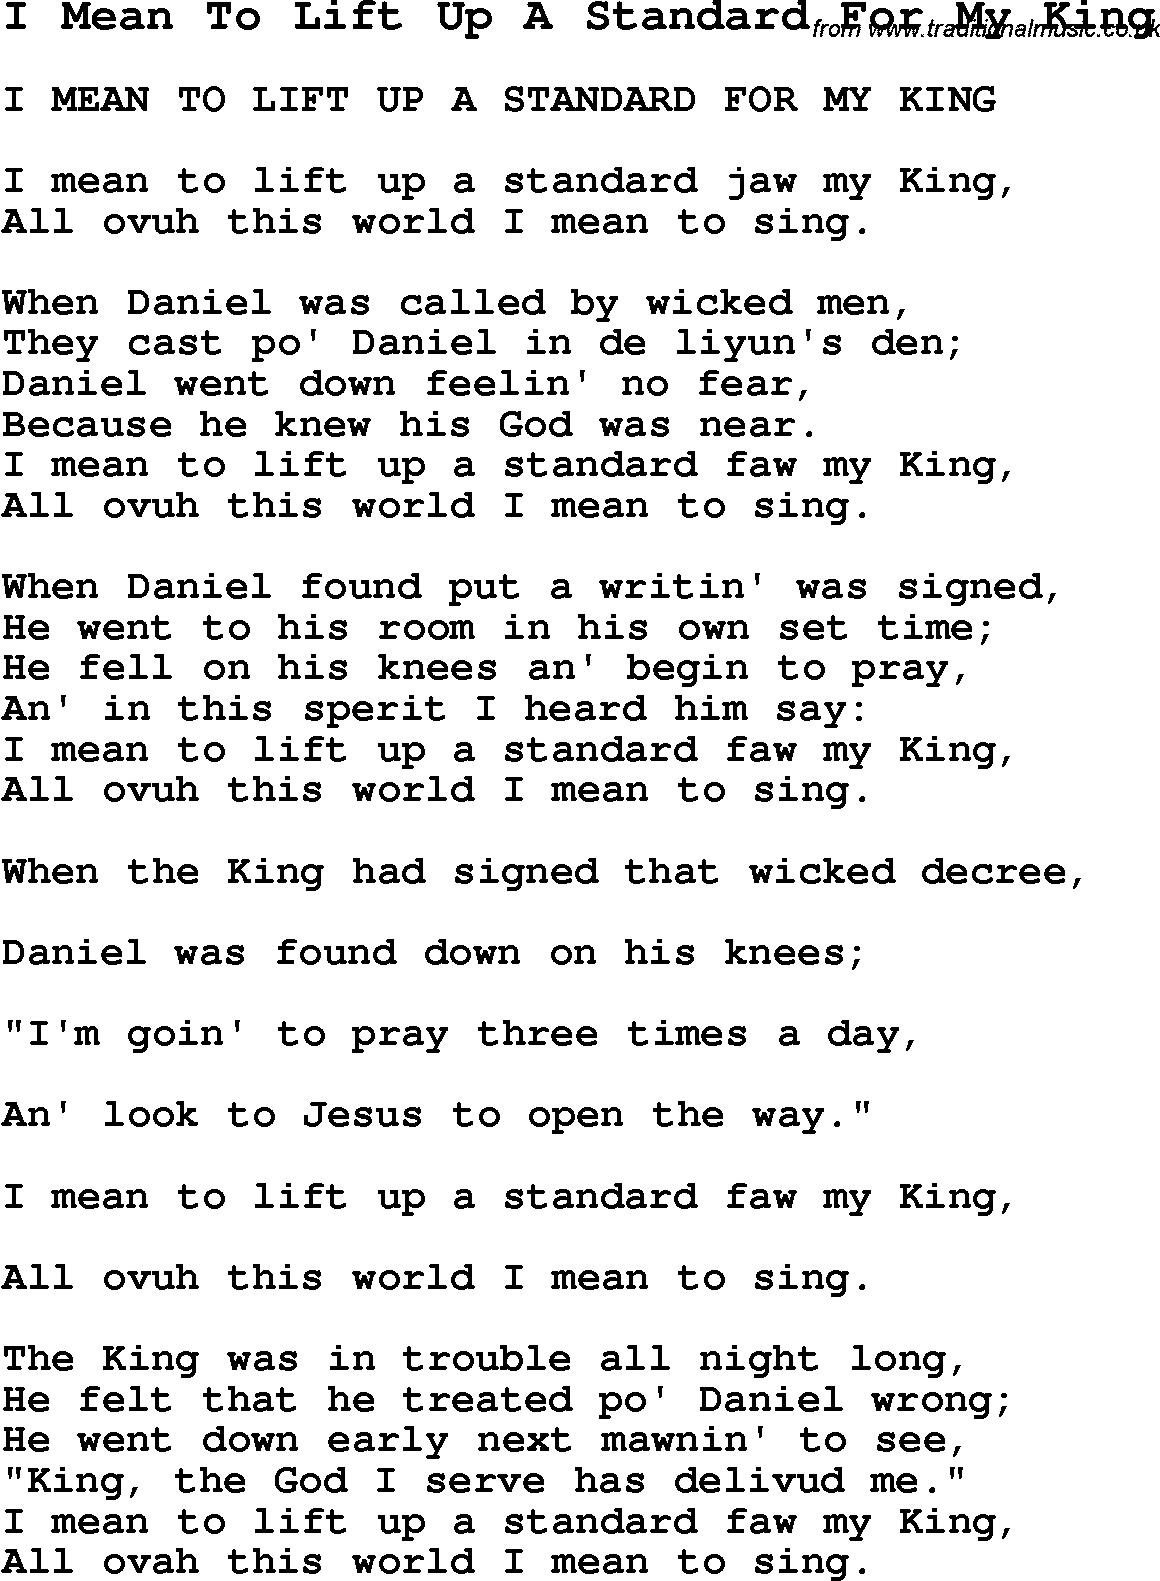 Negro Spiritual Song Lyrics for I Mean To Lift Up A Standard For My King